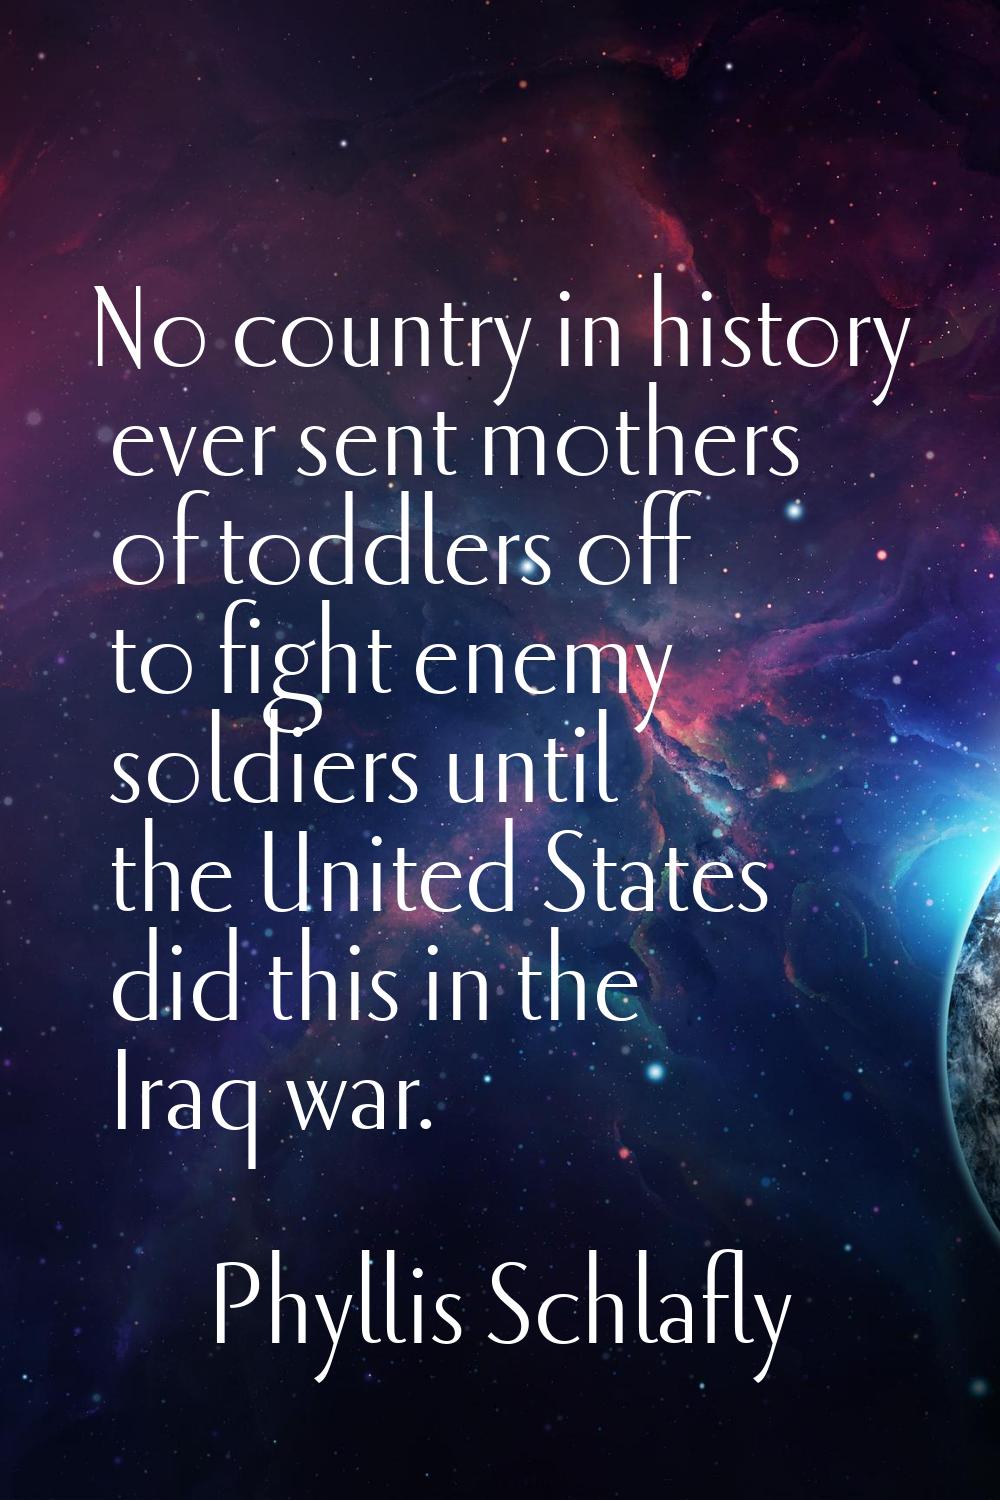 No country in history ever sent mothers of toddlers off to fight enemy soldiers until the United St